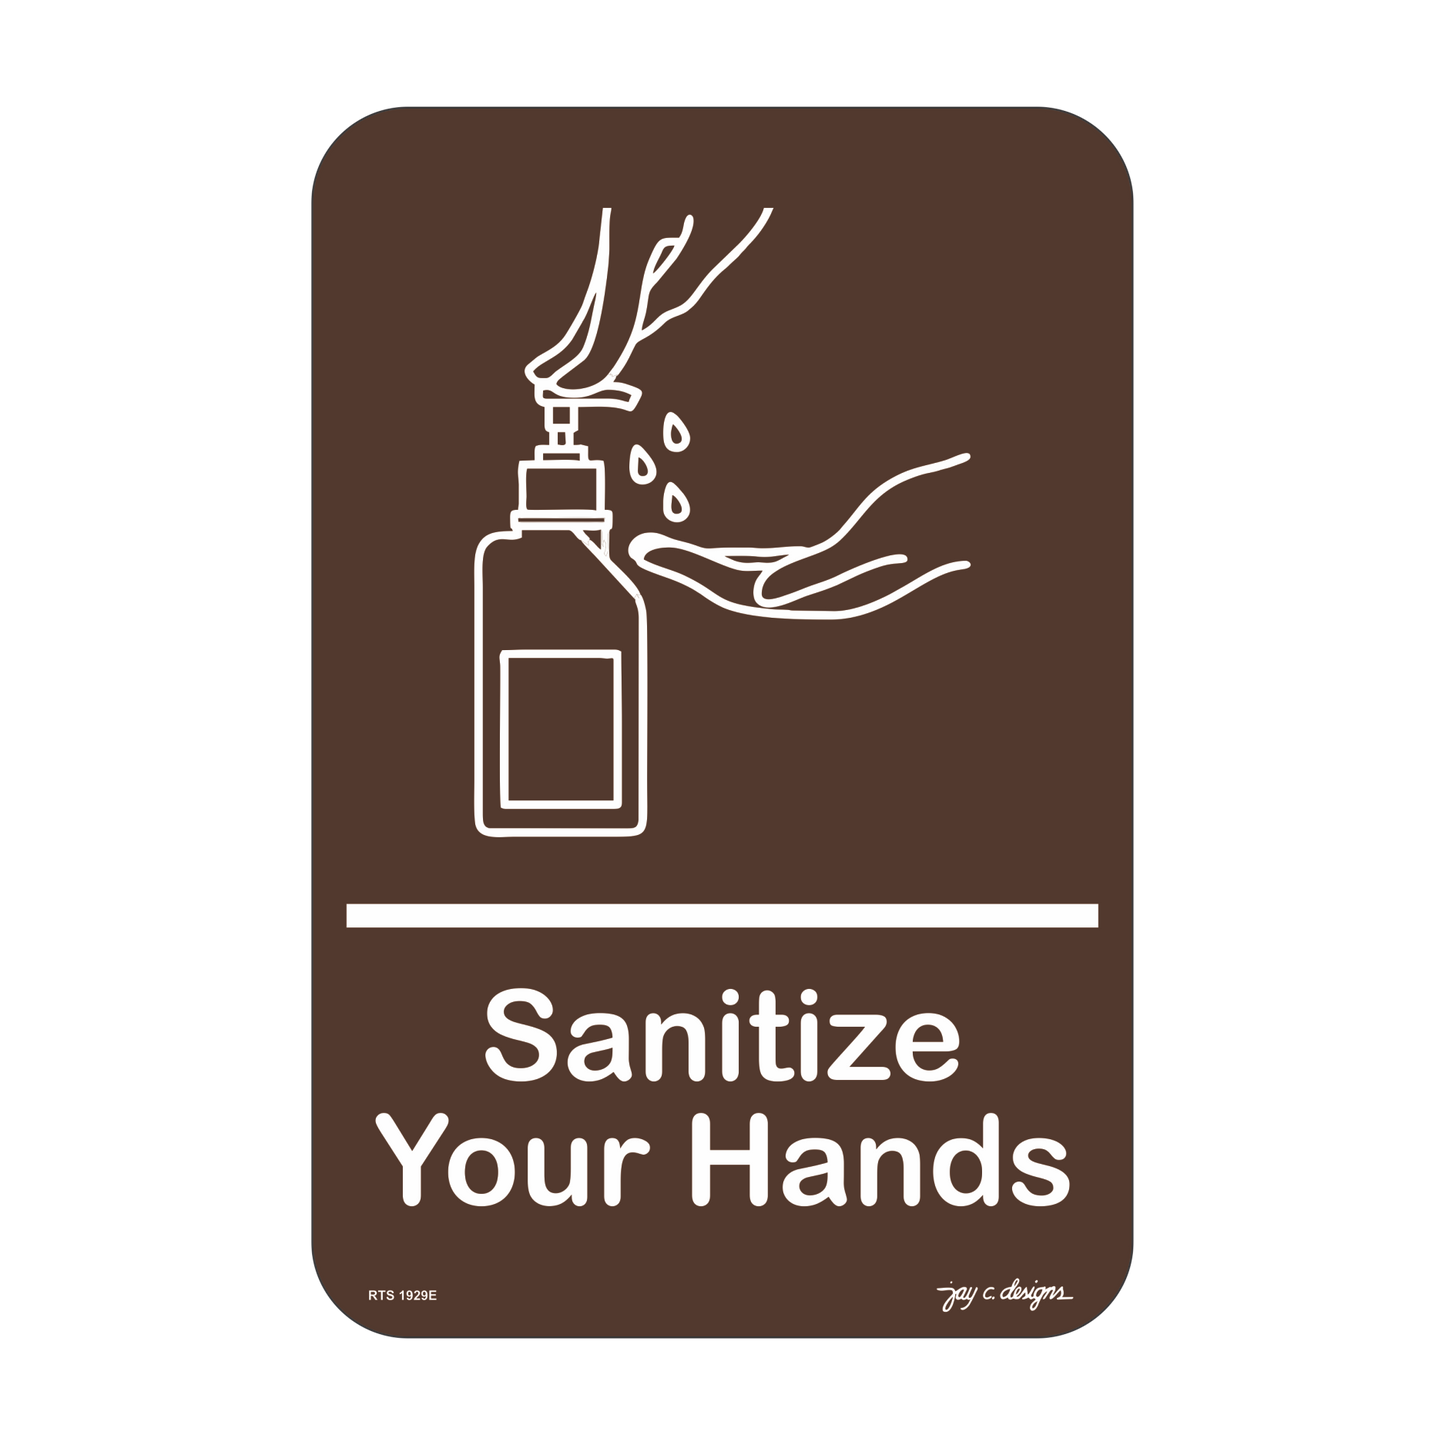 1929 Sanitize Your Hands (Acrylic) - 6.0in x 9.0in x 1.5mm